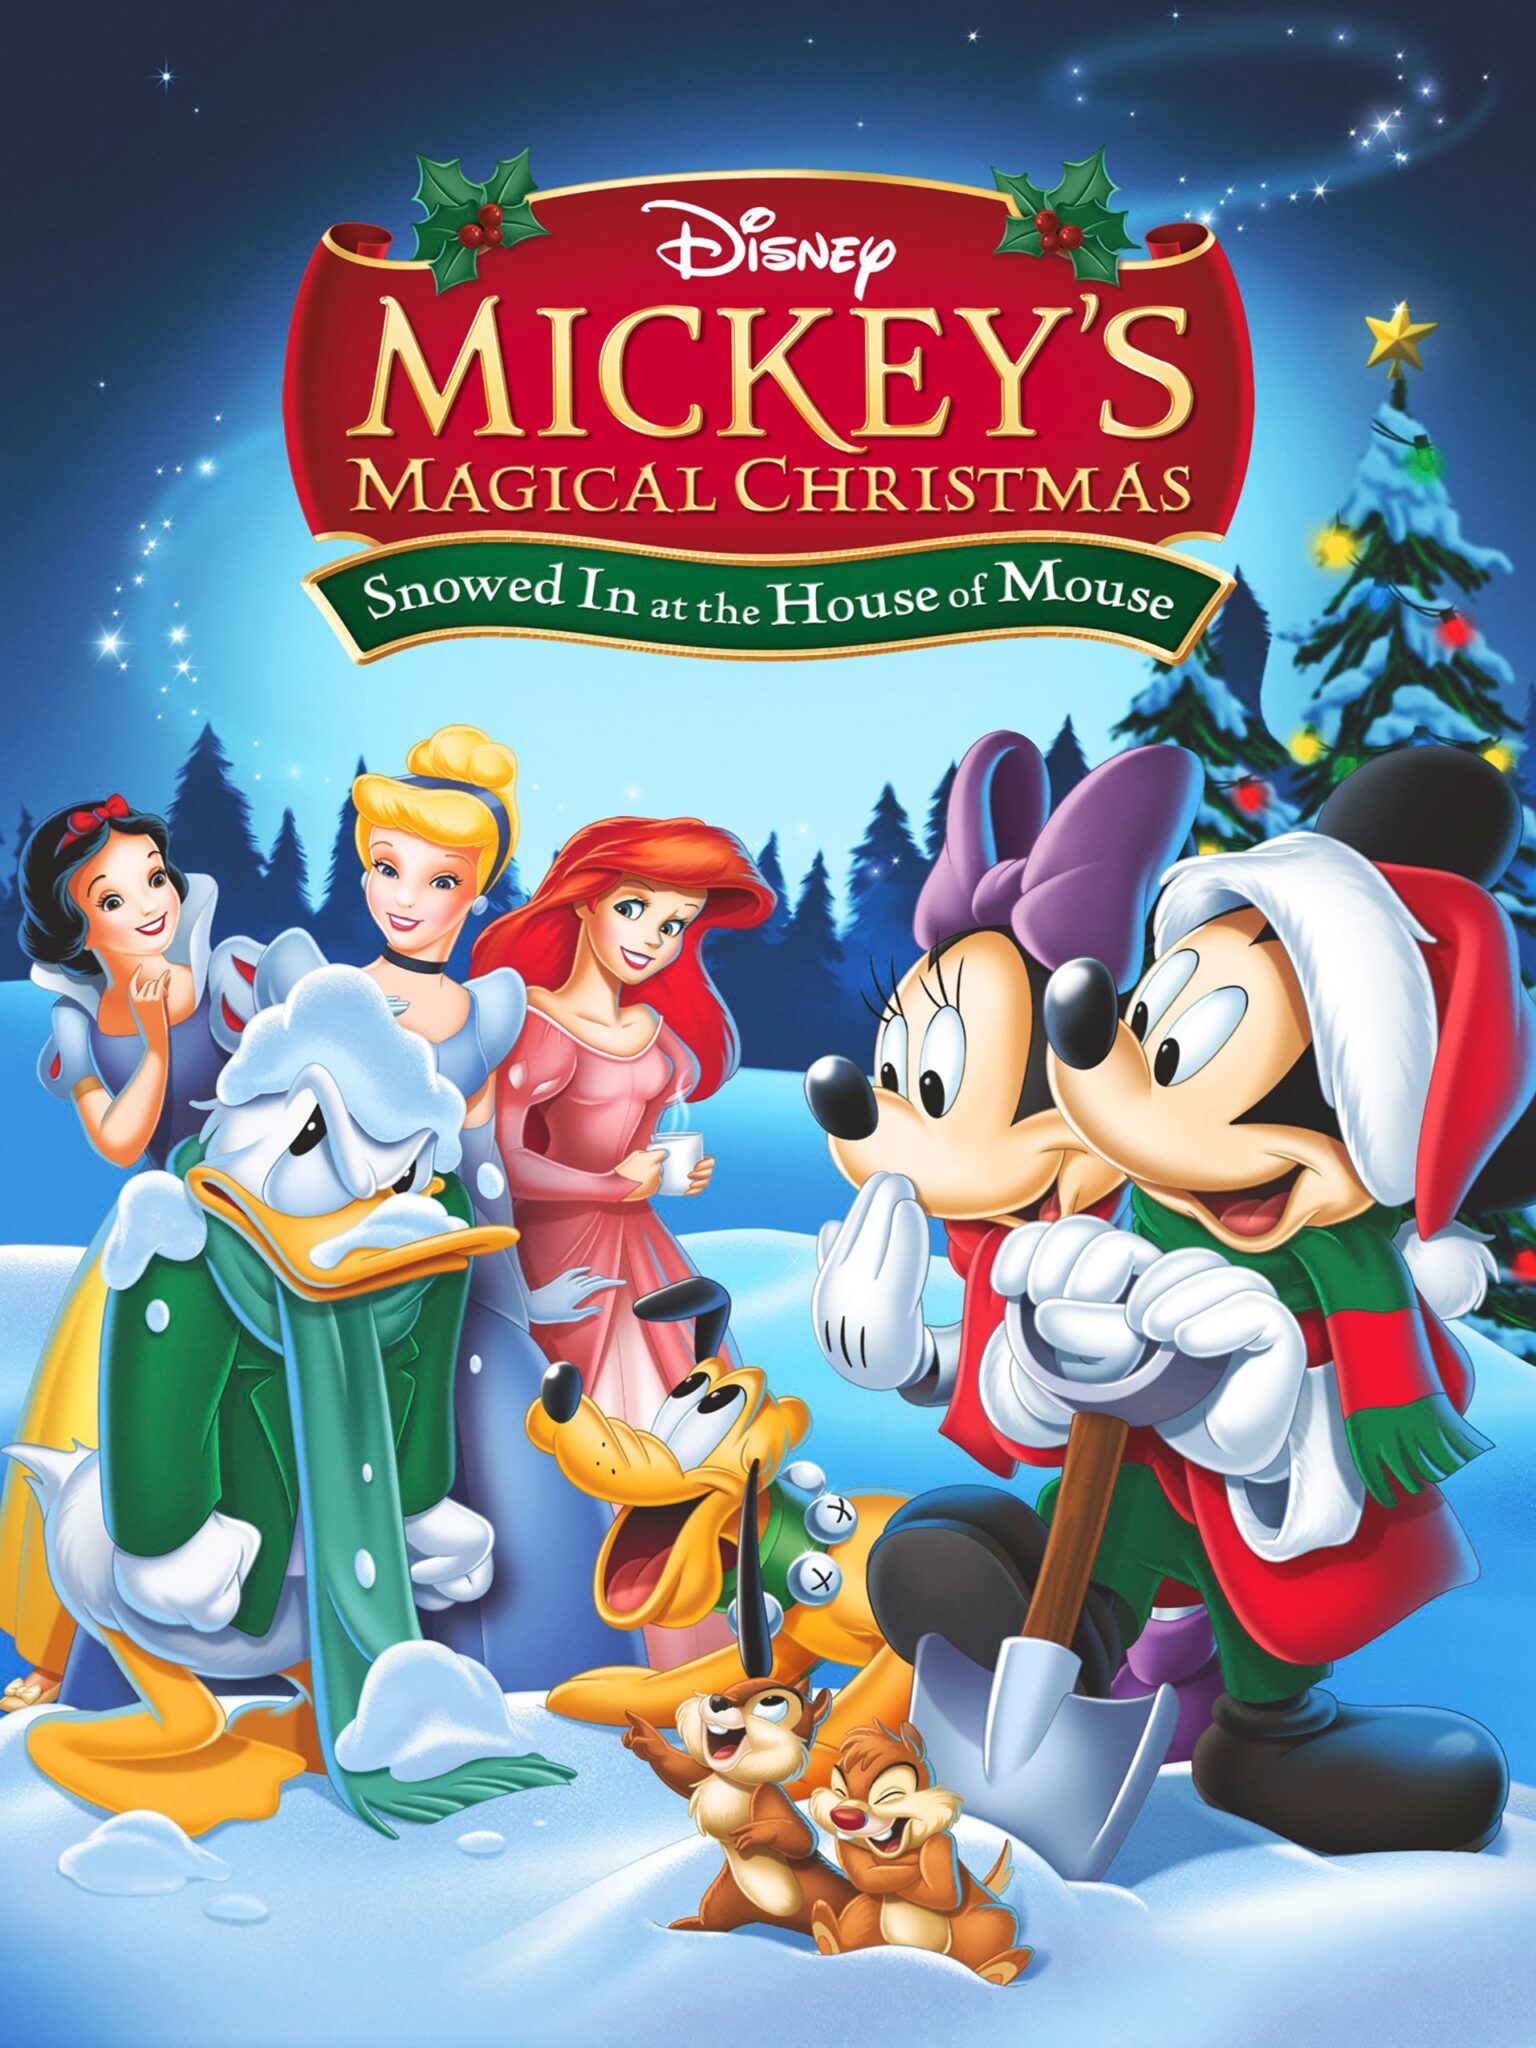 Mickeys Magical Christmas Snowed In At The House Of Mouse